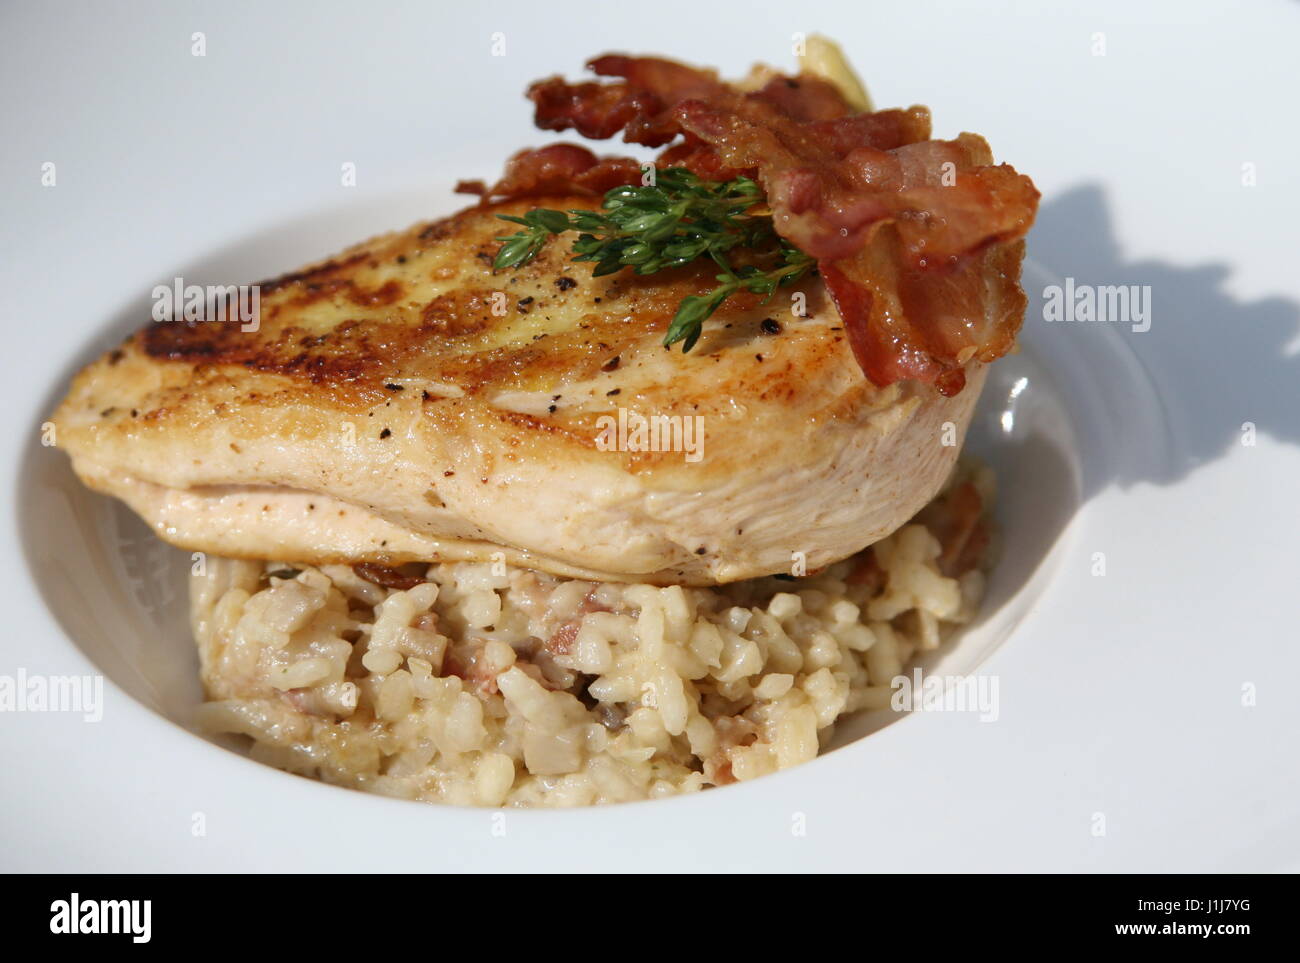 A chicken and bacon dish served on top of rice Stock Photo